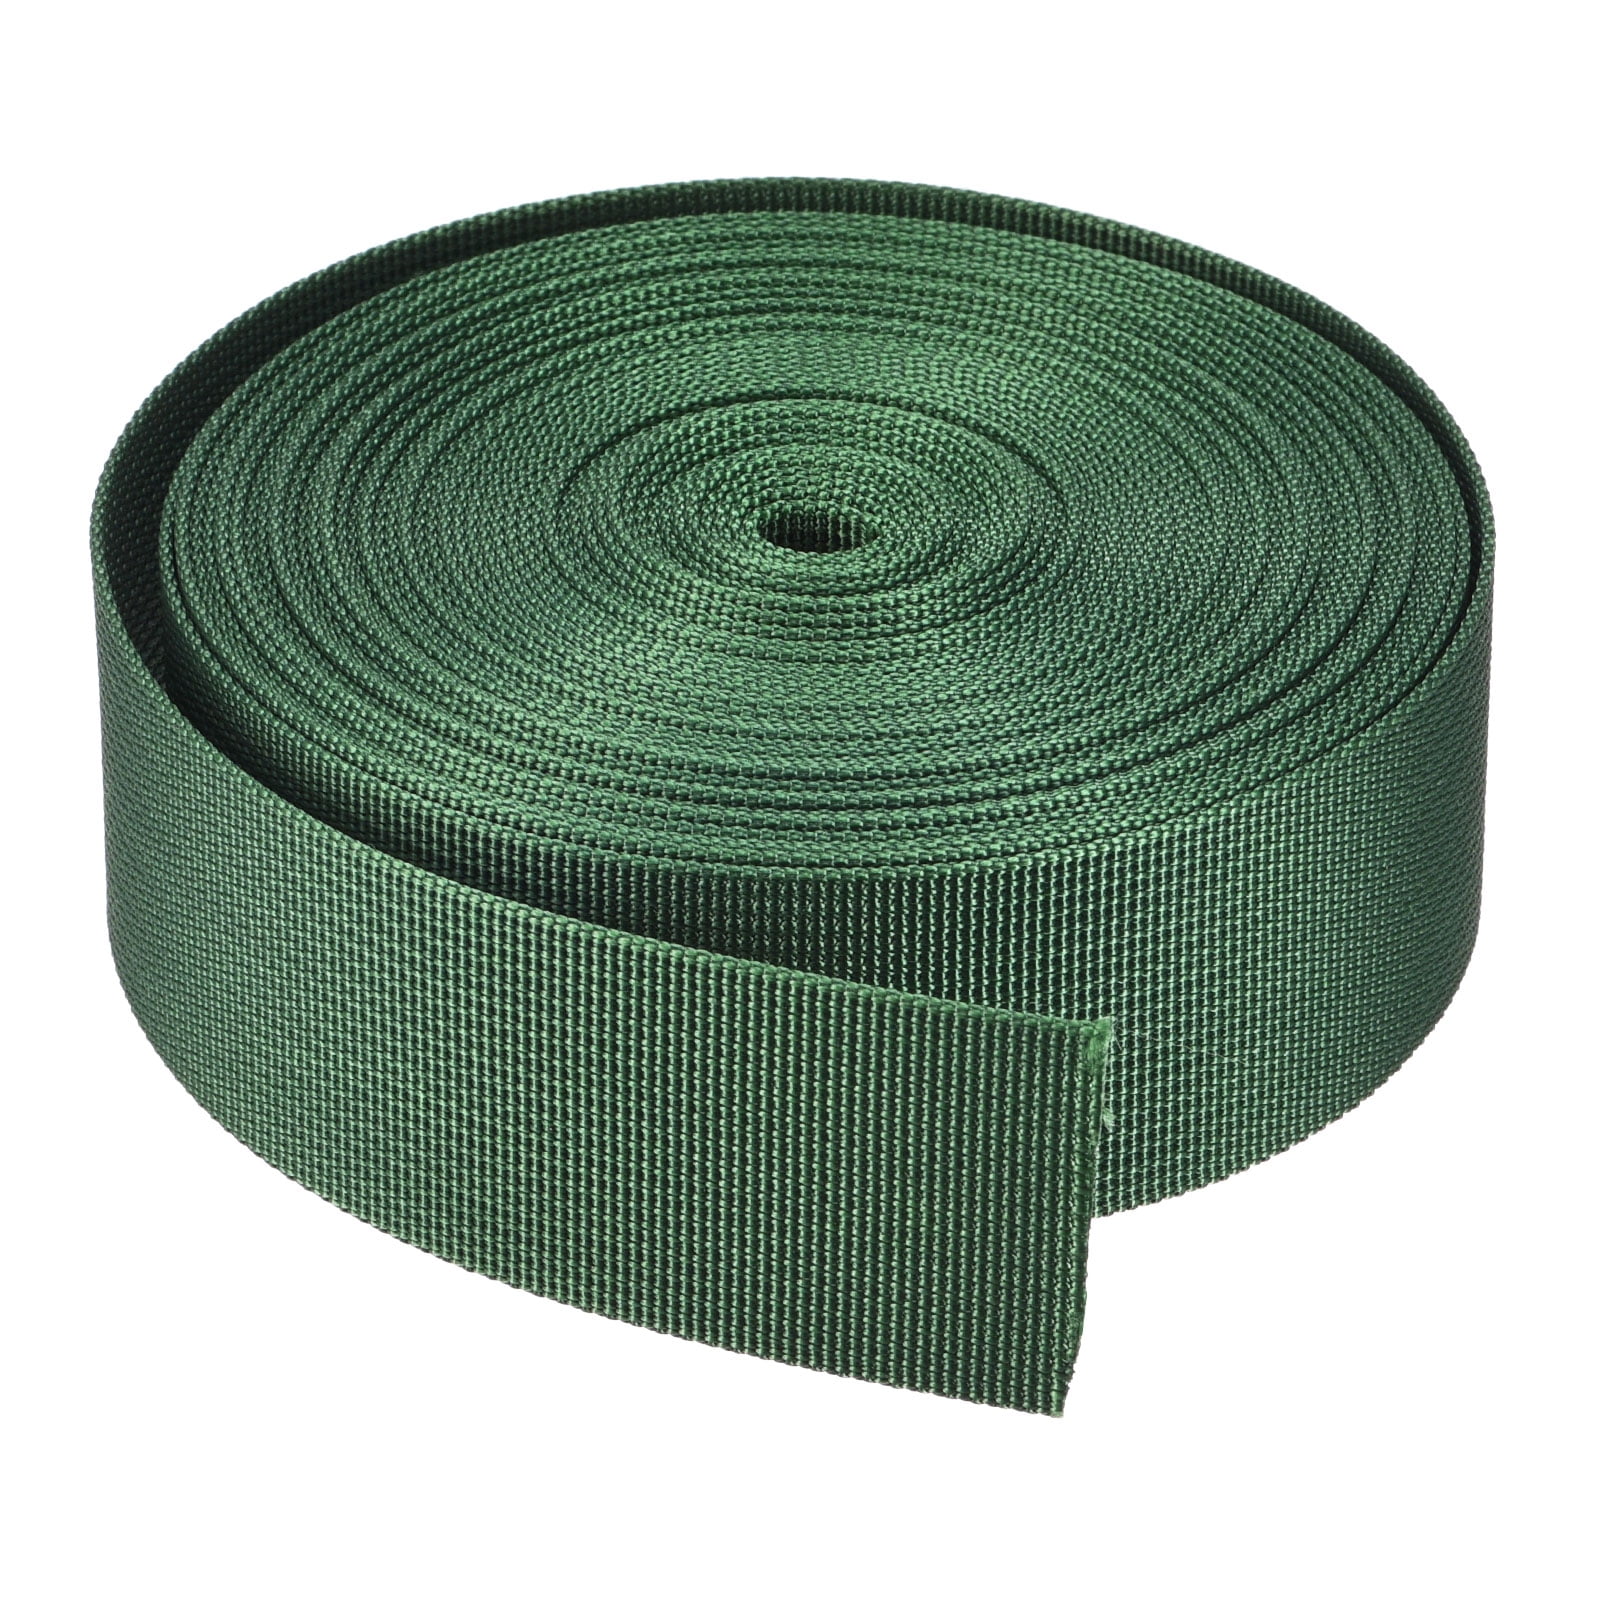 Cotton Webbing 3/4inch 1inch 1.5inch 2inch, Upholstery Webbing Strap for  Bags Chairs Cargo Strapping